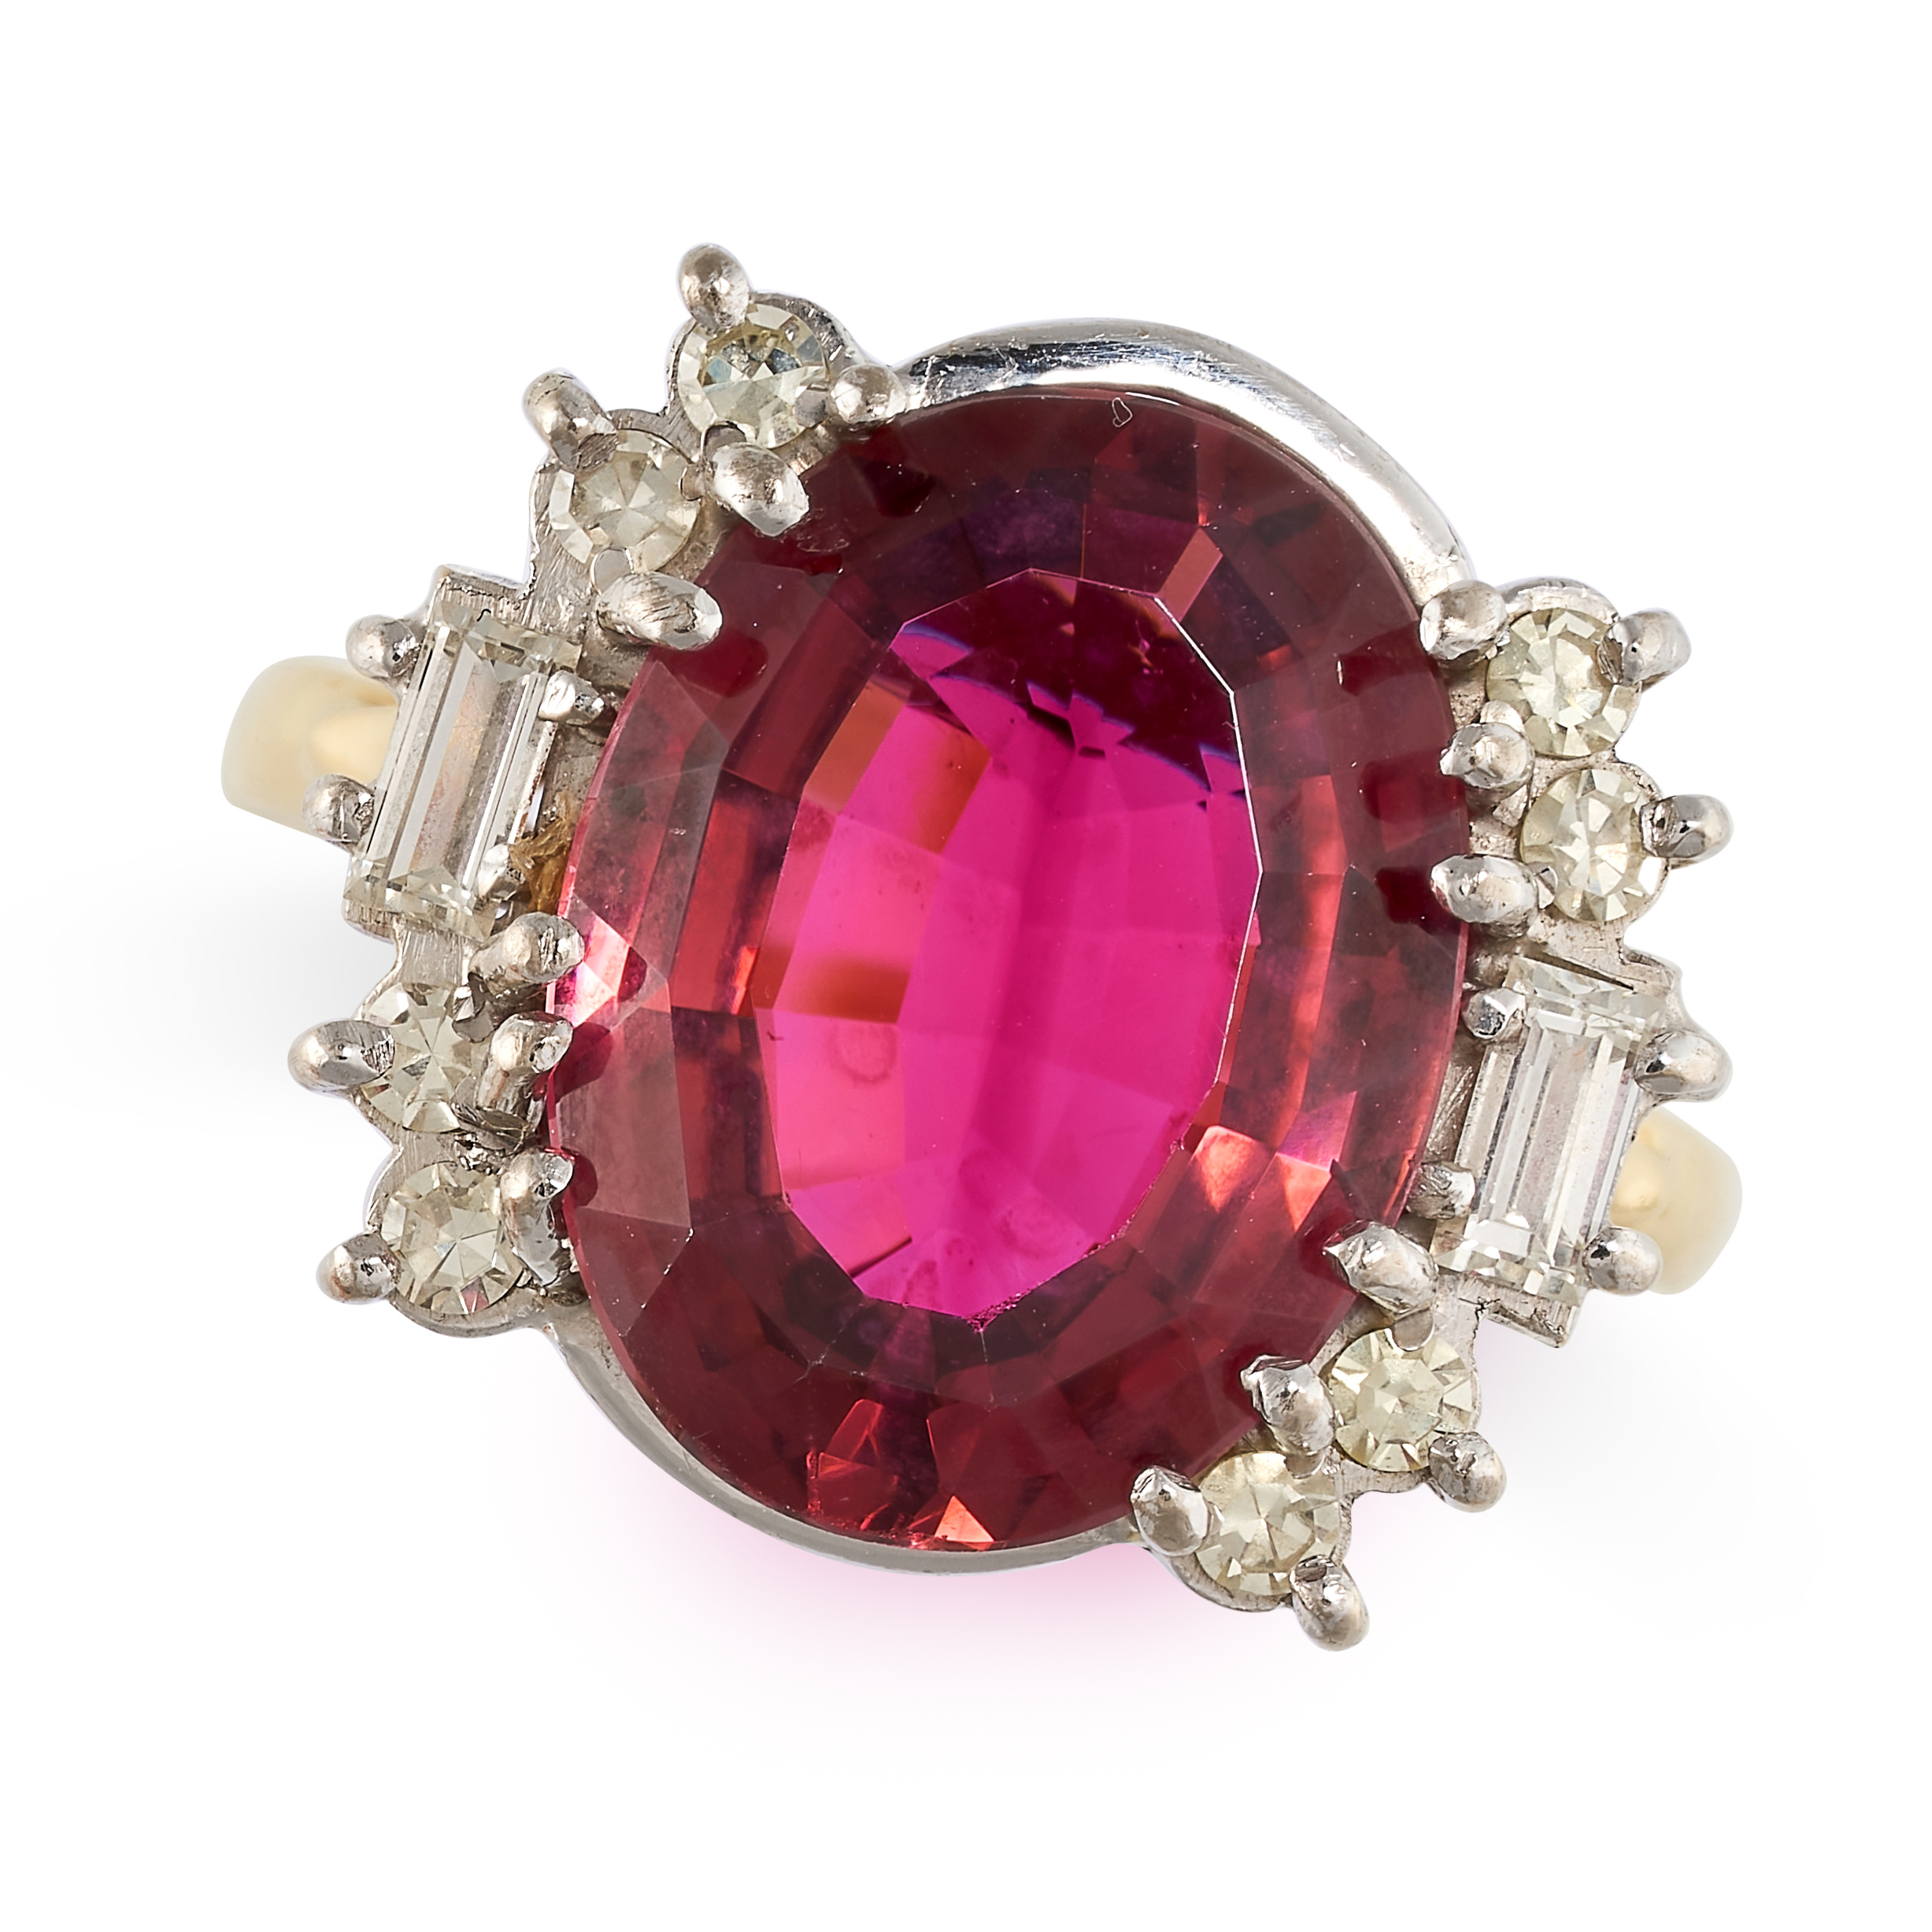 A PINK TOURMALINE AND DIAMOND RING in 18ct yellow gold, set with an oval cut pink tourmaline,